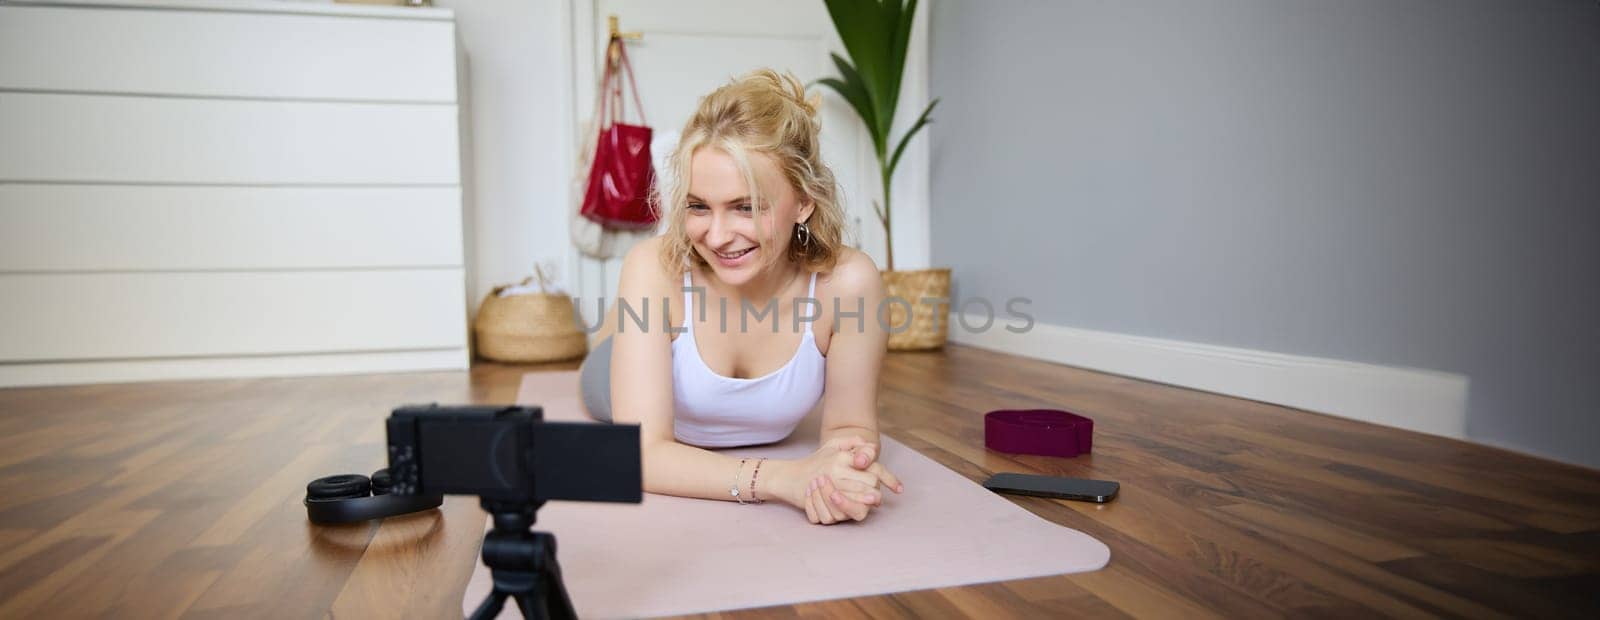 Portrait of young fitness instructor, vlogger creating content at home, doing workout and record exercises on digital camera, using rubber yoga mat.